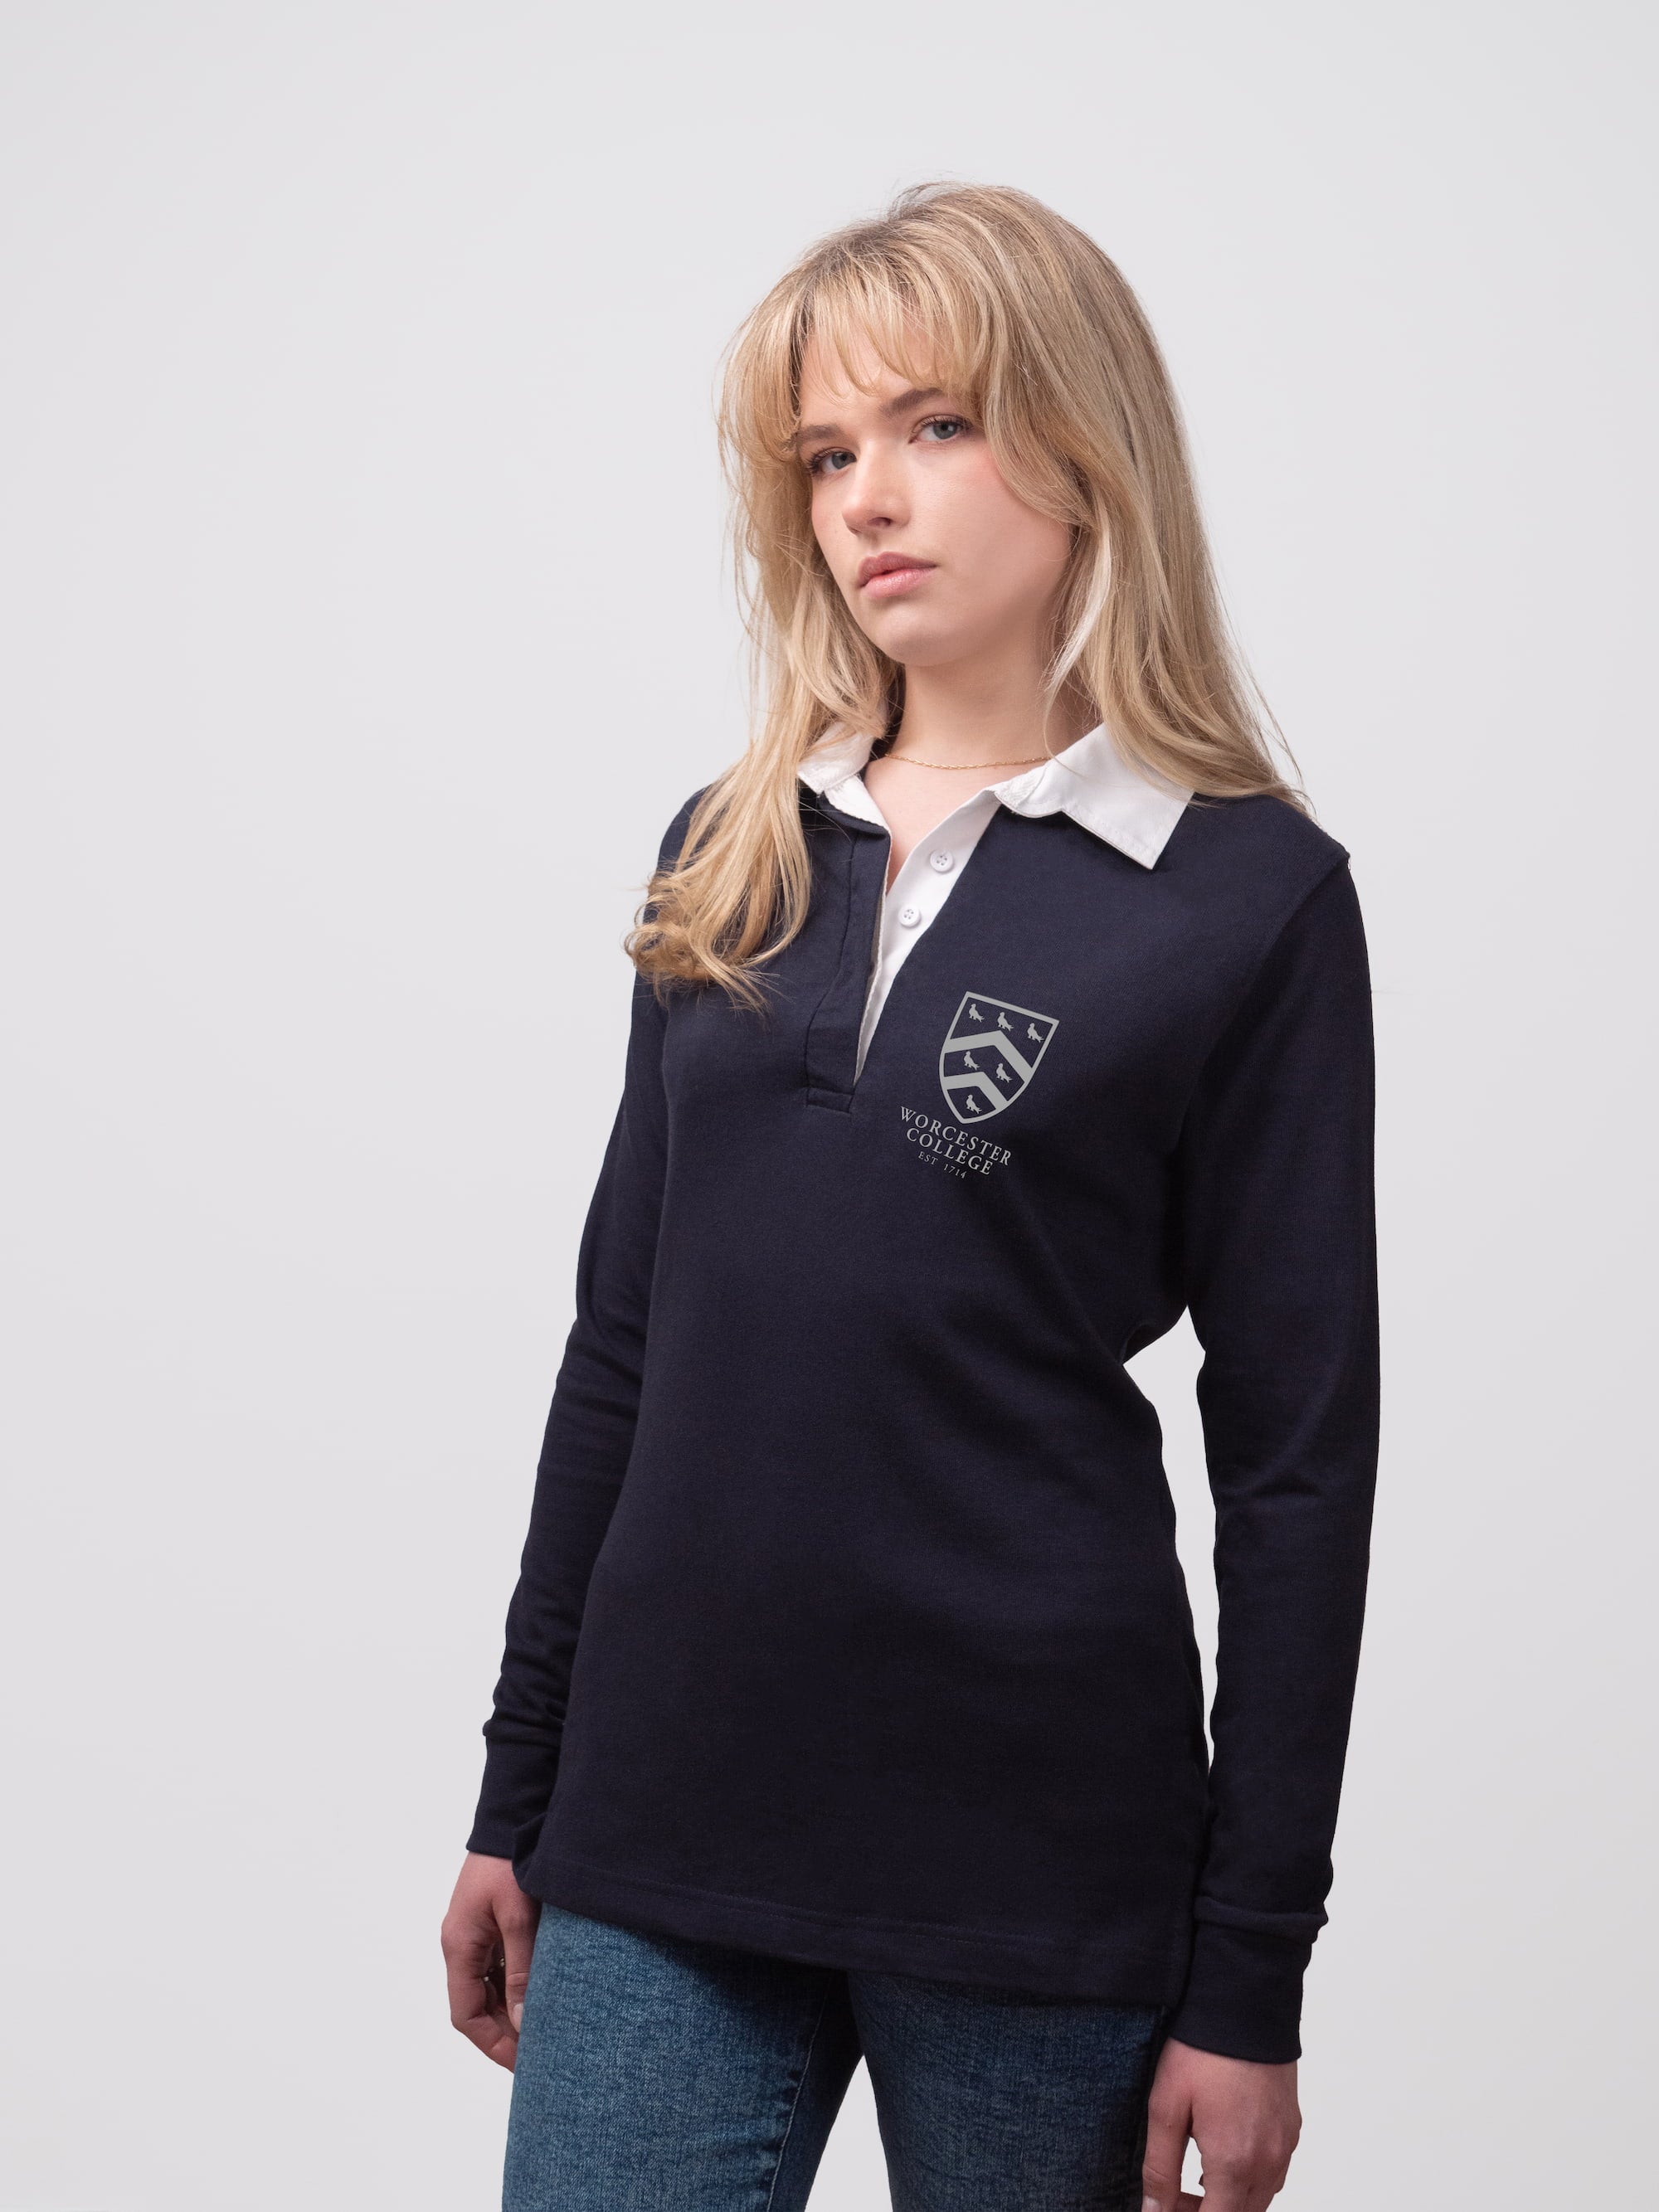 Student wearing a navy Worcester College rugby shirt with embroidered crest